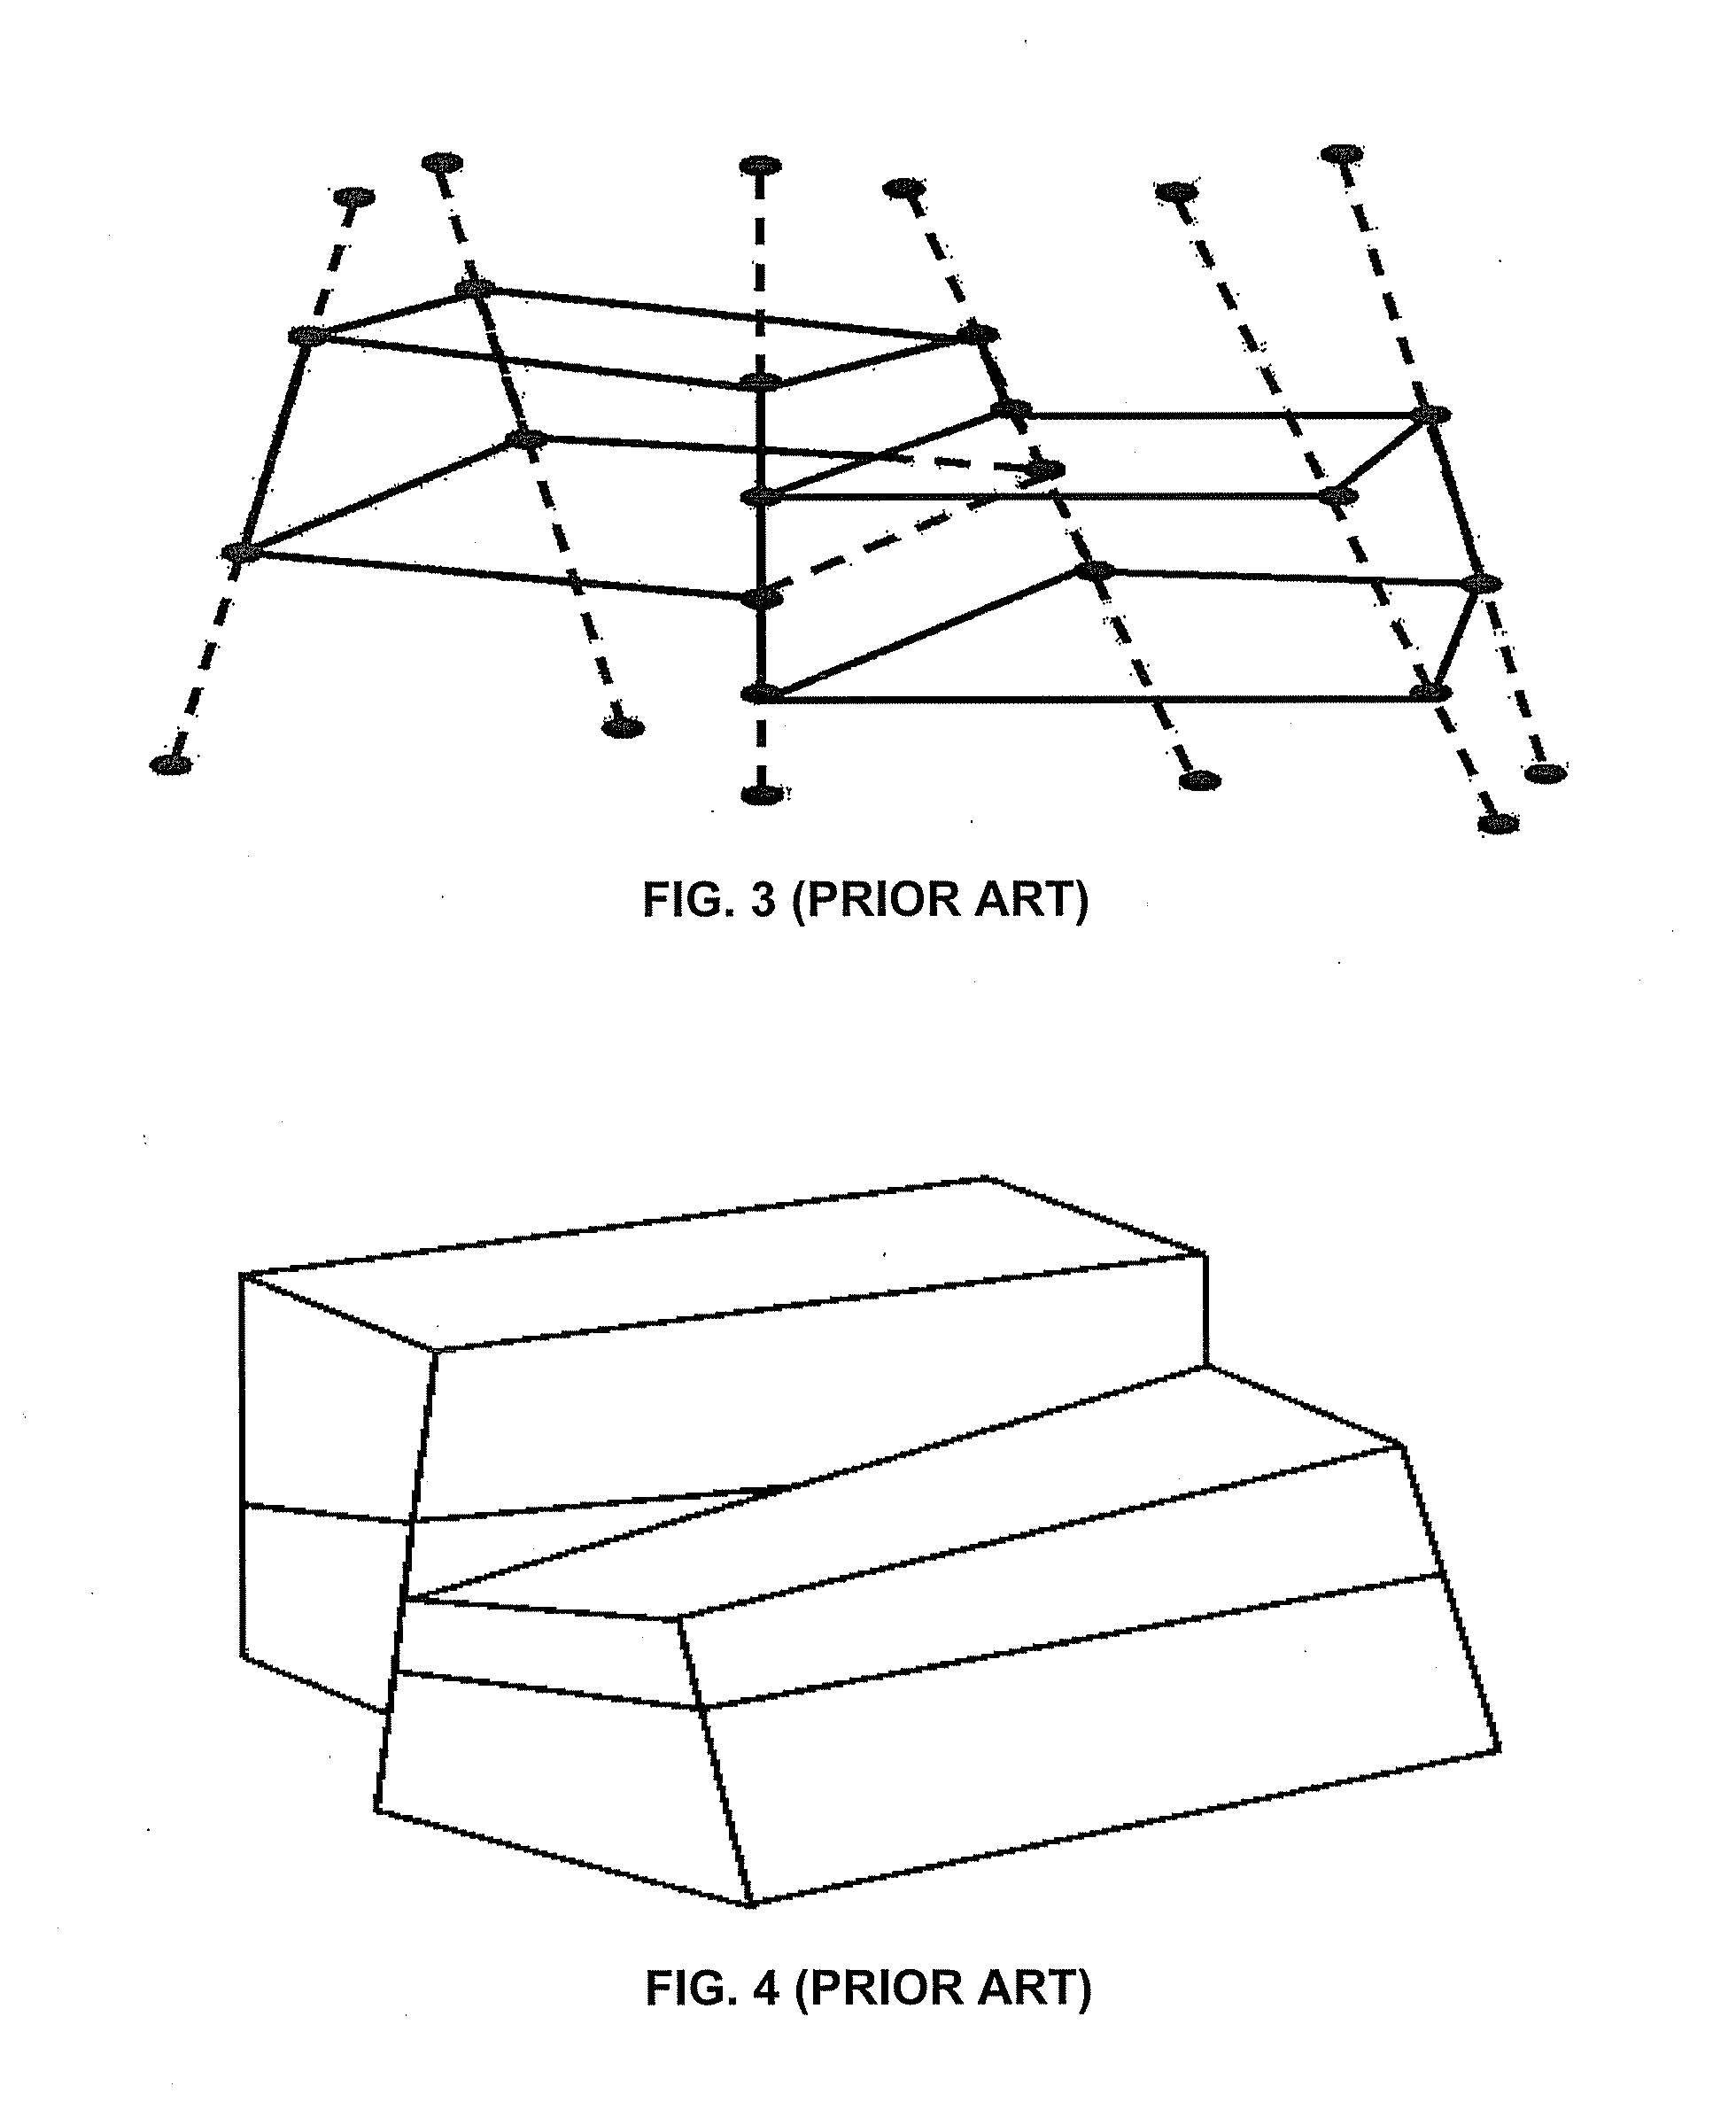 Machine, Program Product, and Computer-Implemented Method to Simulate Reservoirs as 2.5D Unstructured Grids